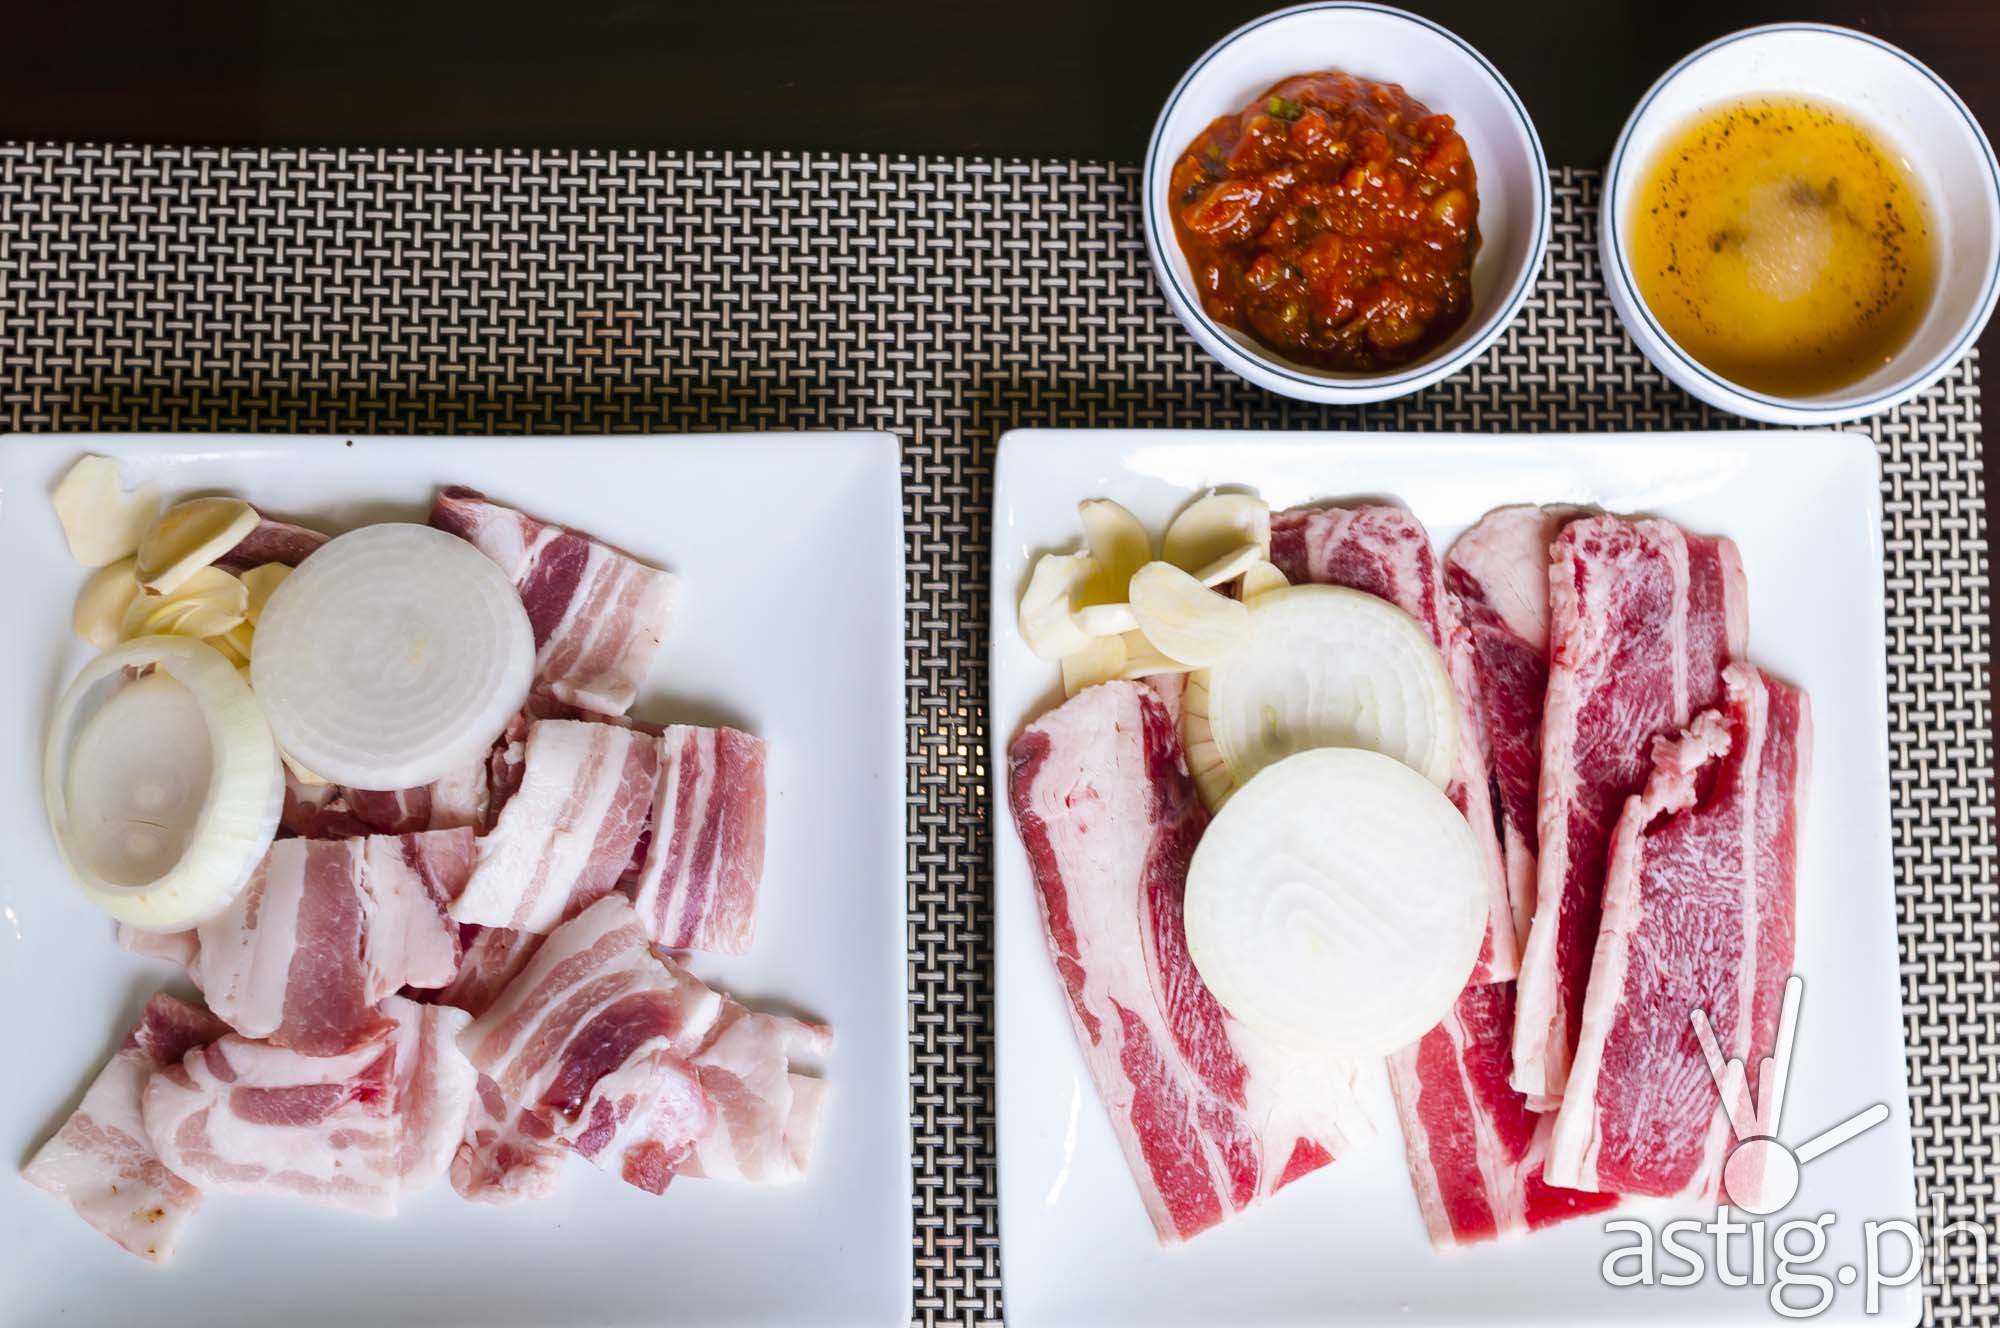 Raw Samgyeopsal (pork belly) and Woomamgyeop (beef belly) at Leann's Tea House